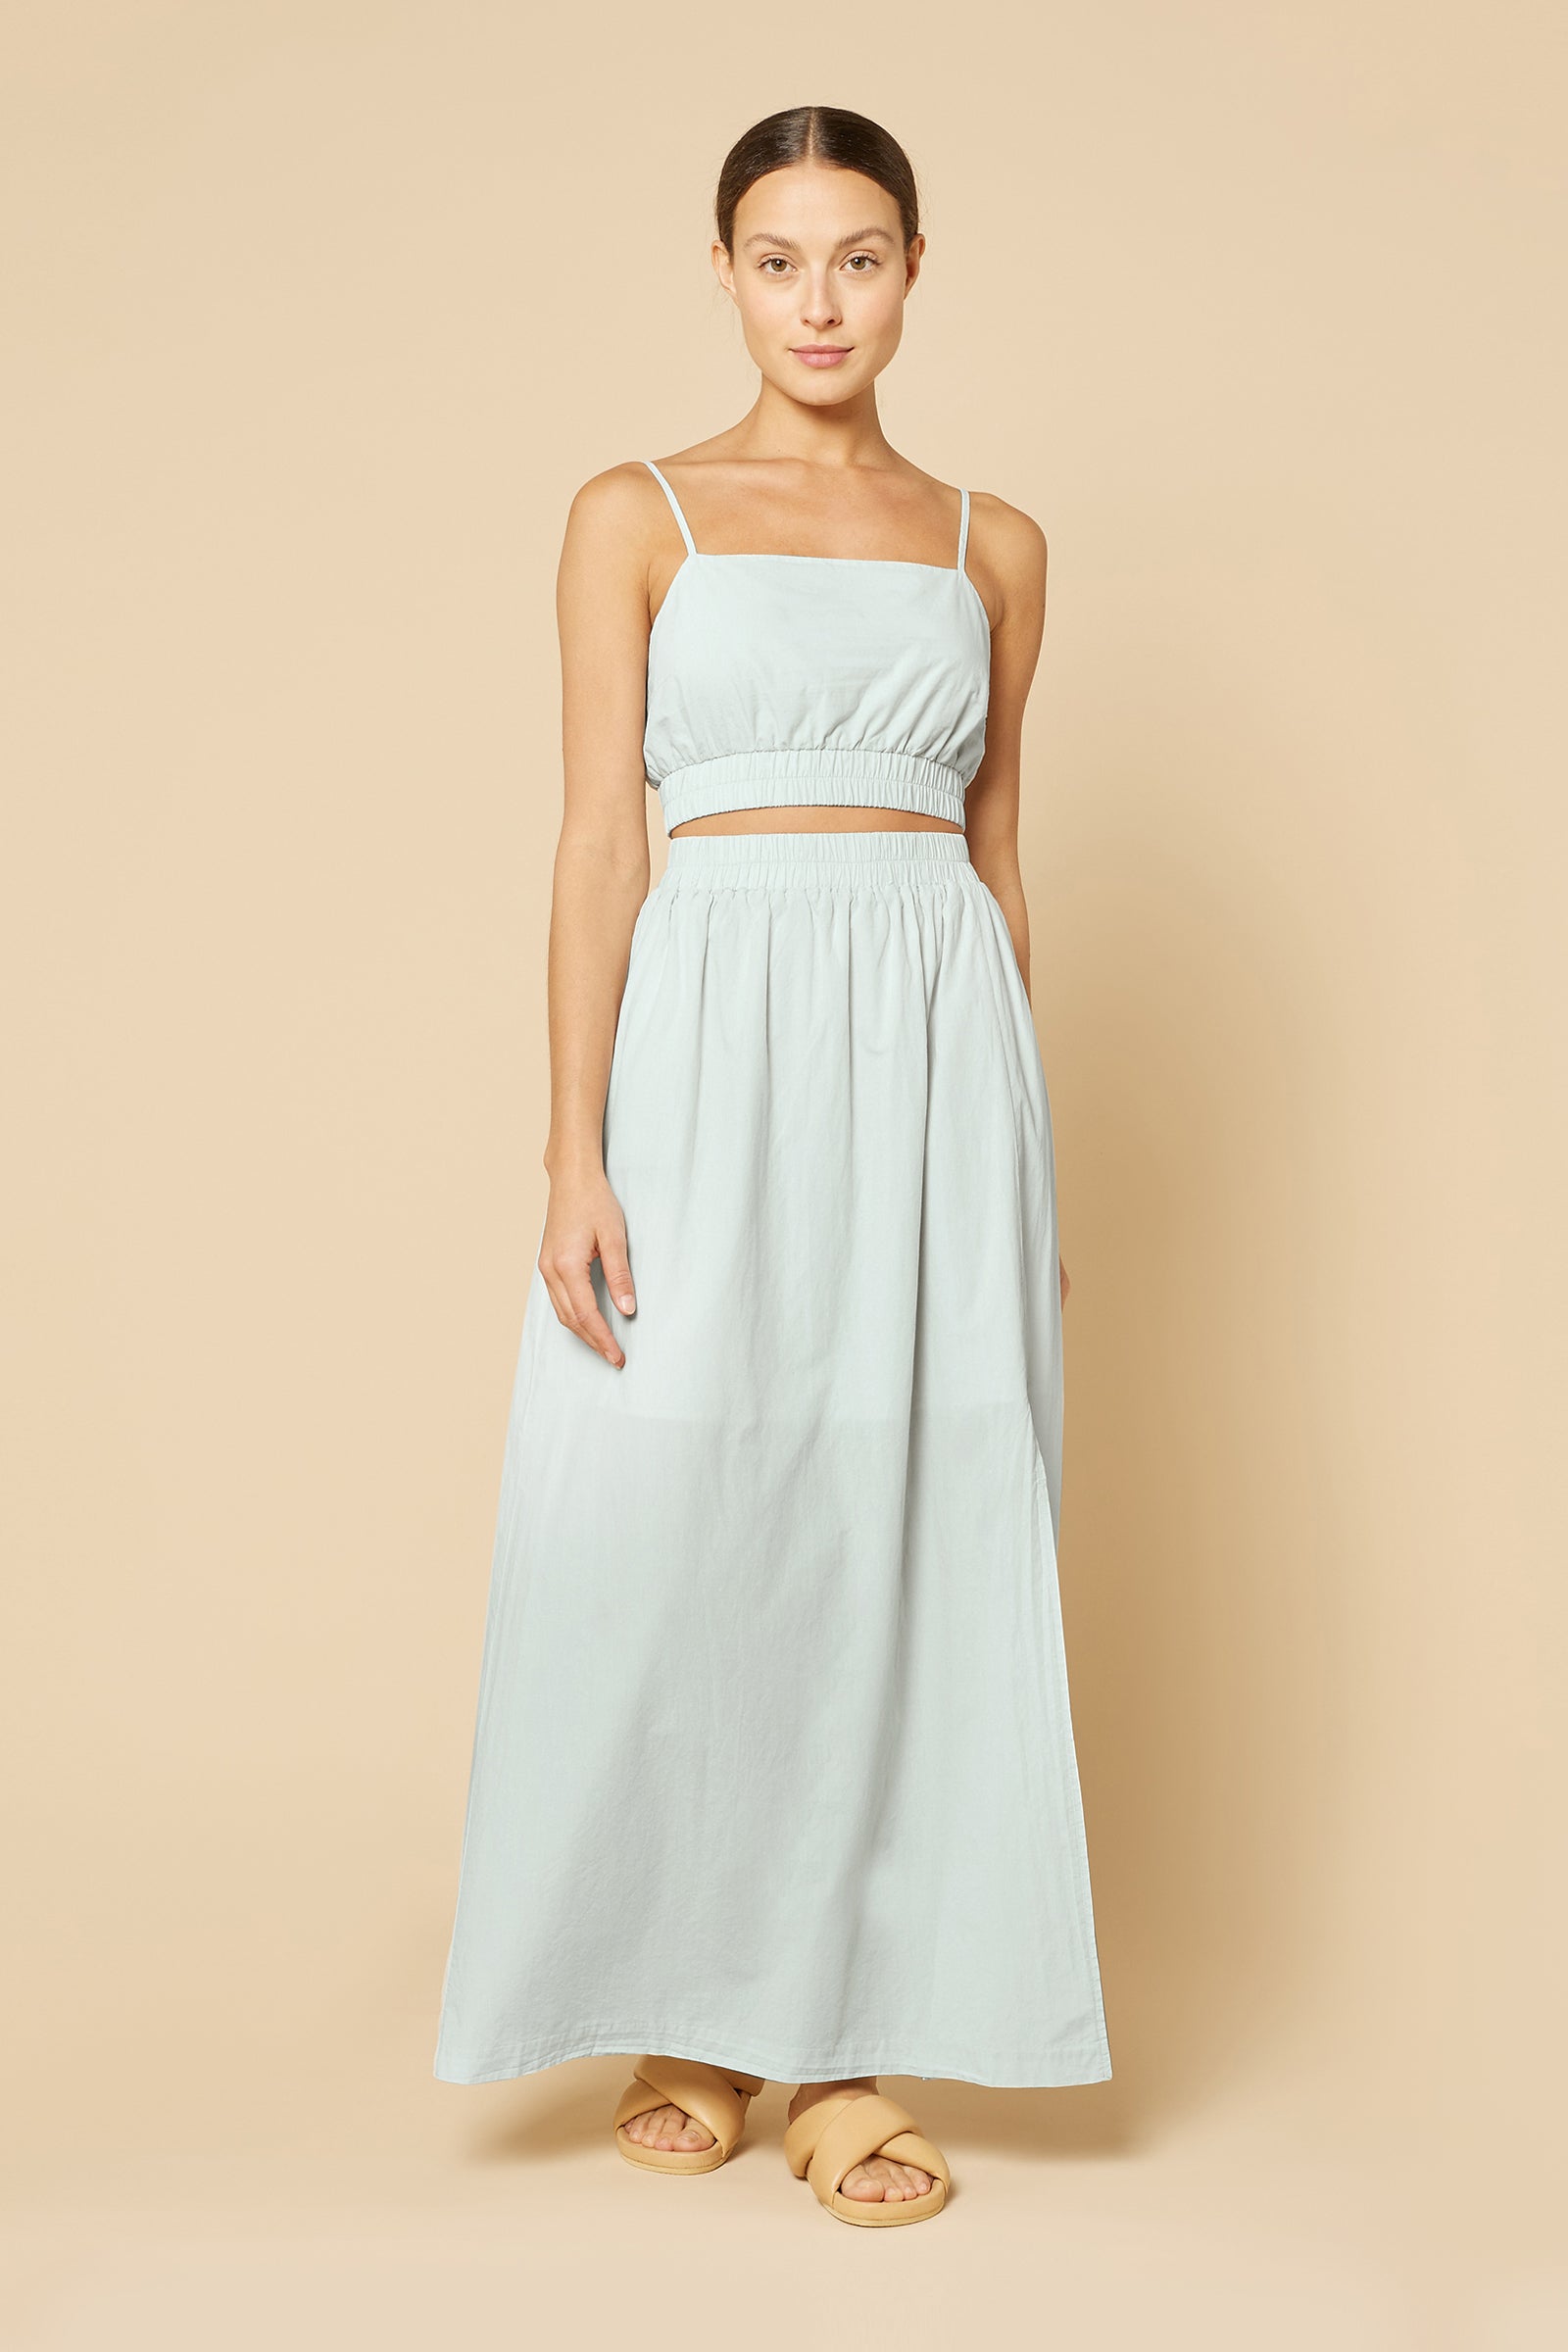 Nude Lucy Odessa Poplin Maxi Skirt In A Ice White Colour 